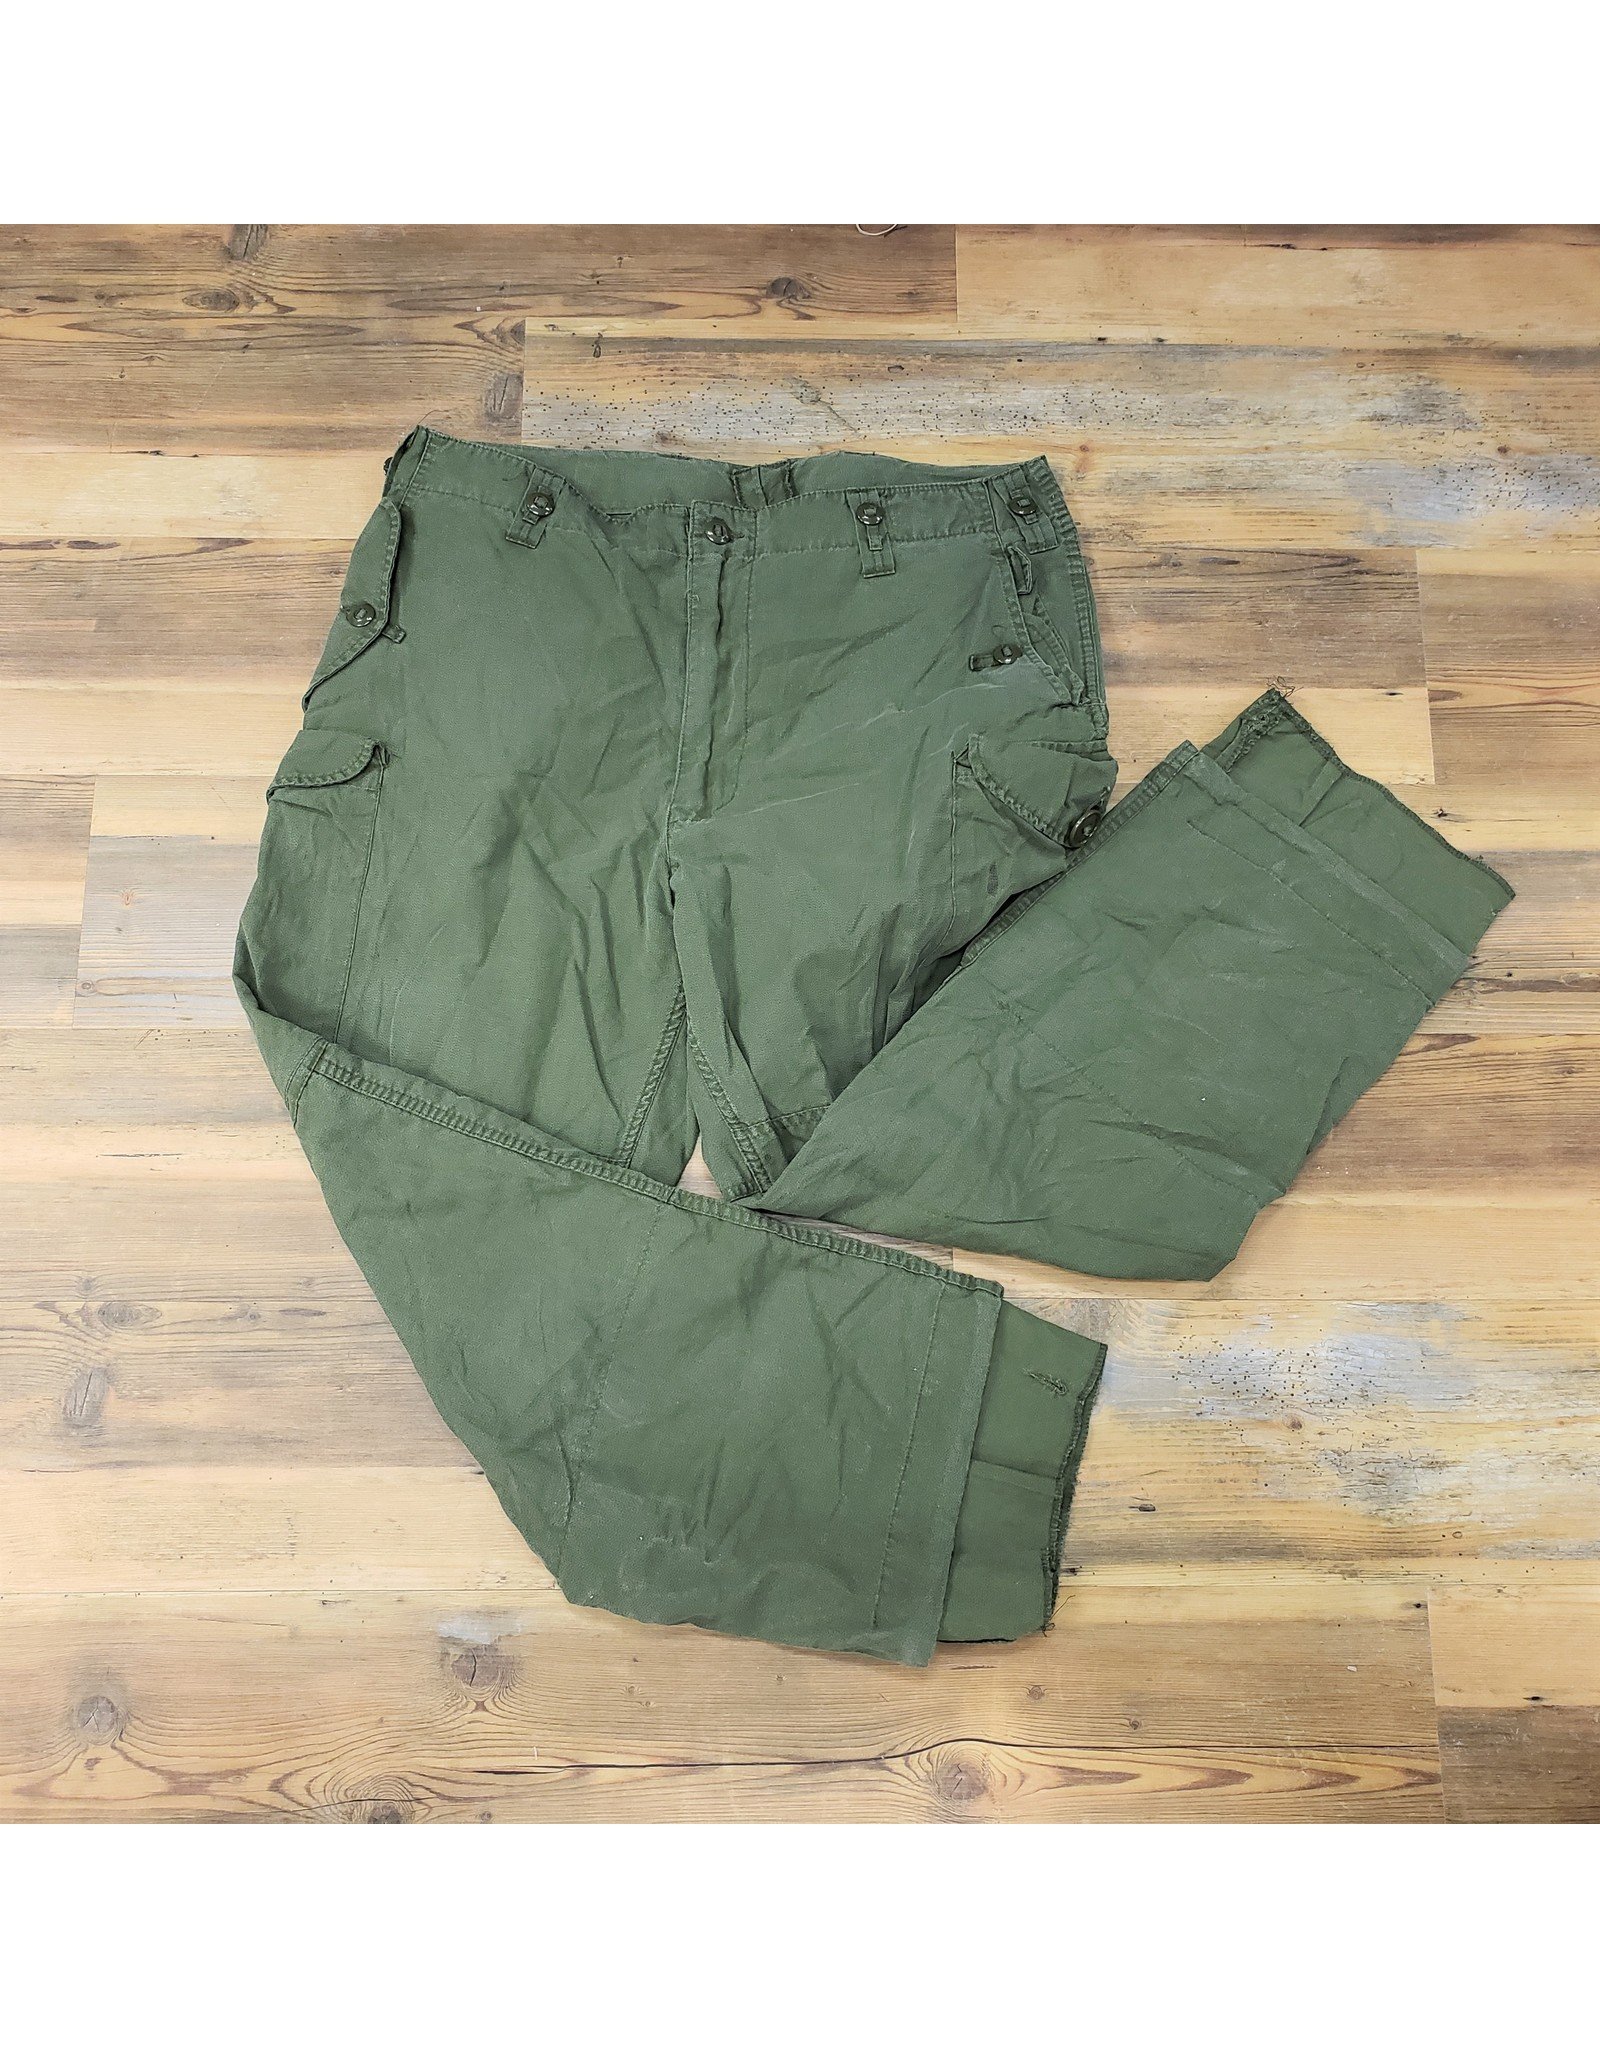 army surplus winter trousers